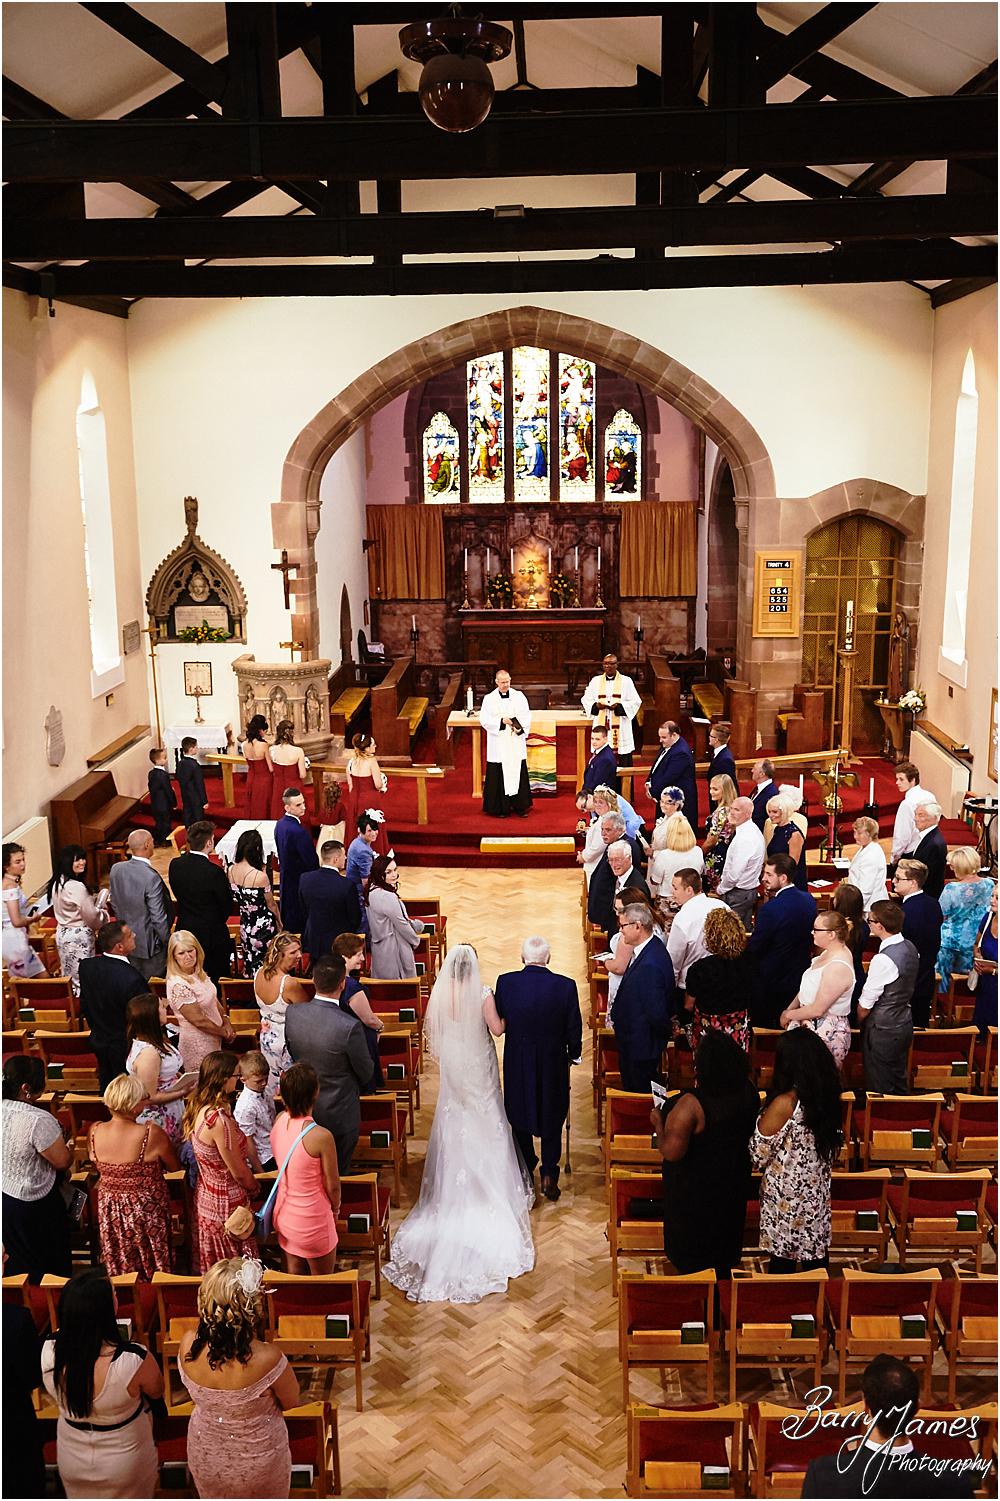 Unobtrusive photographs of the beautiful wedding ceremony at St Michaels Church Pelsall by Walsall Wedding Photographer Barry James